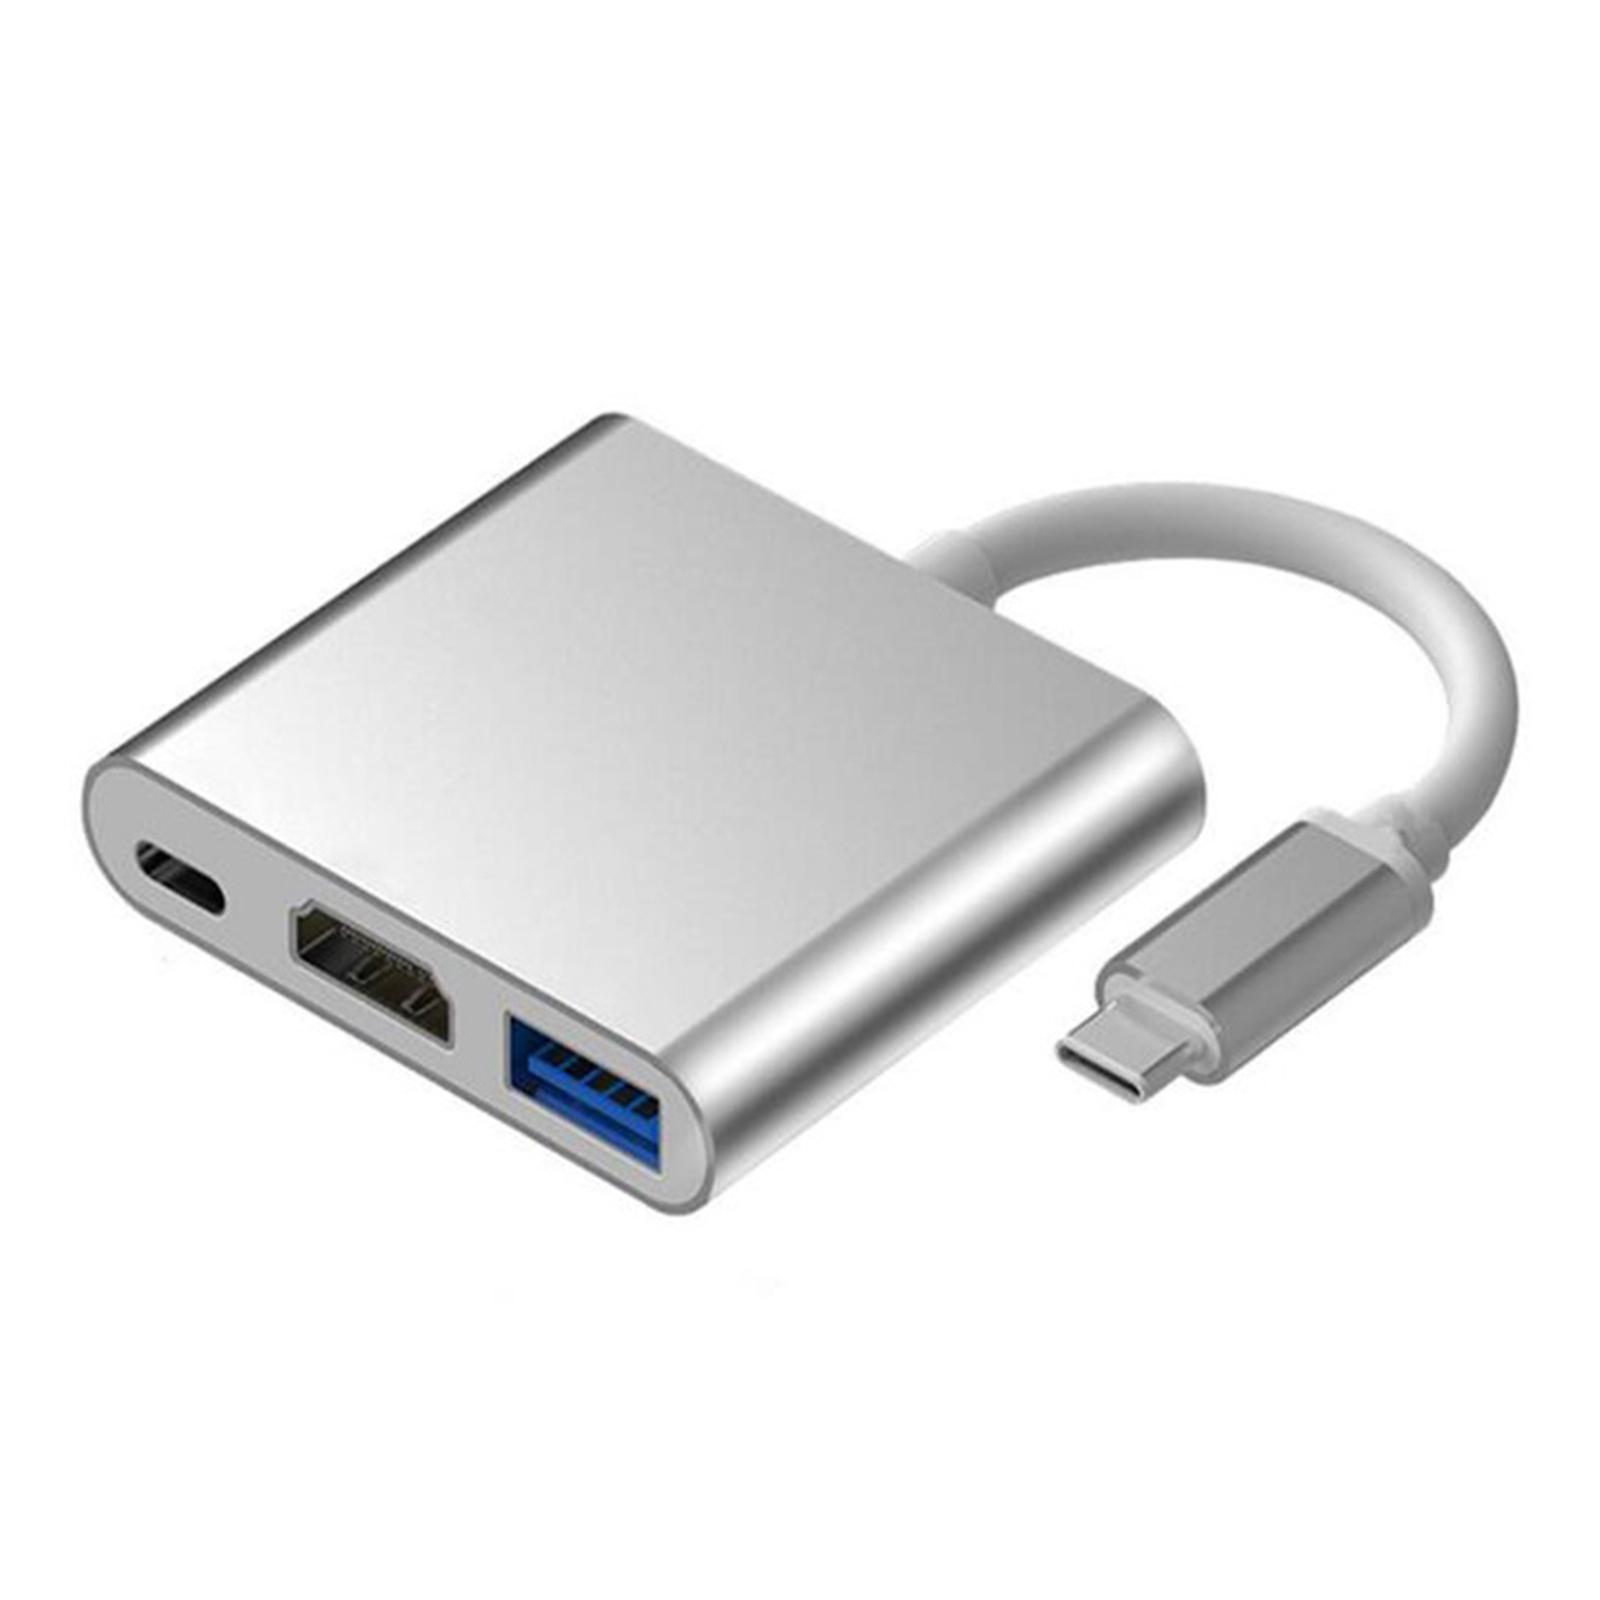 Type C USB 3.1 To USB-C 4K HDMI USB 3.0 Adapter Cable 1 3 Hub In G4J1 .